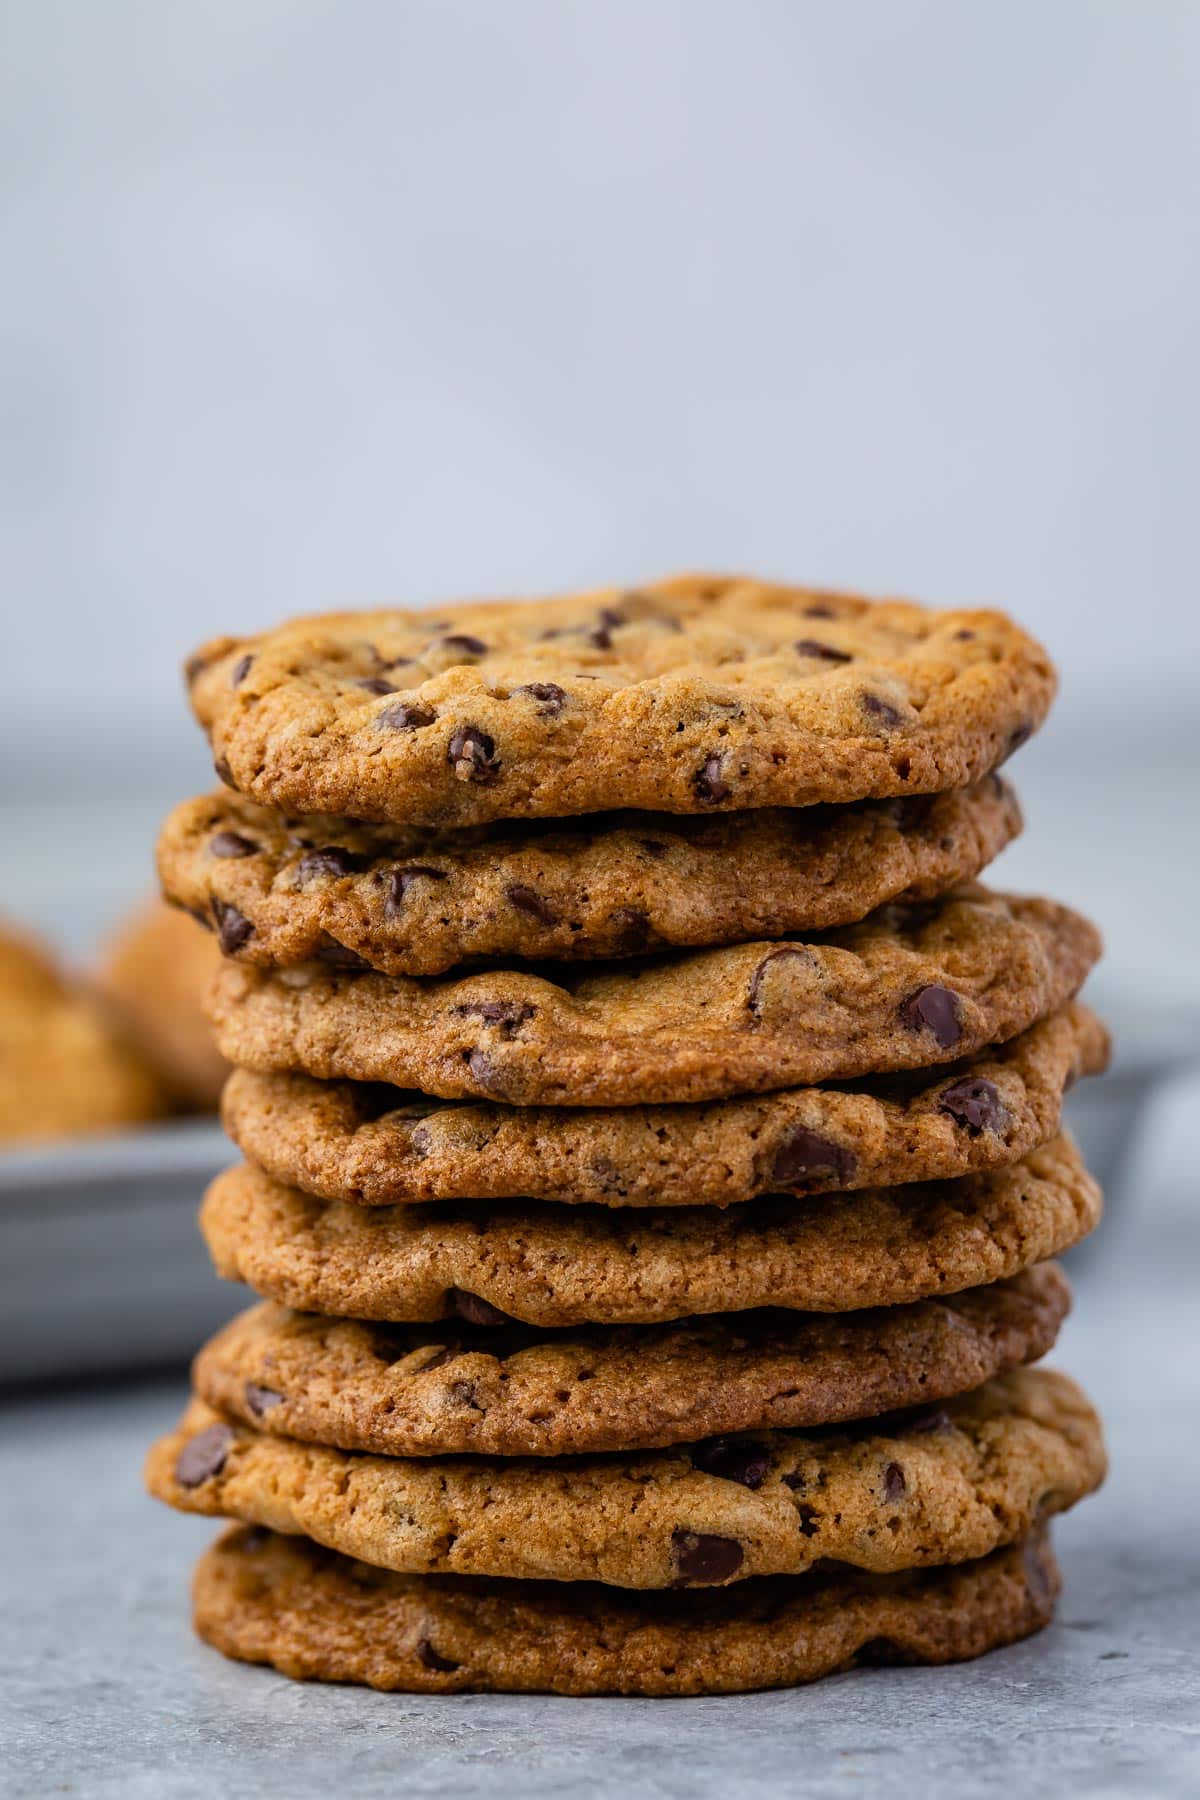 large stack of chocolate chip cookies.